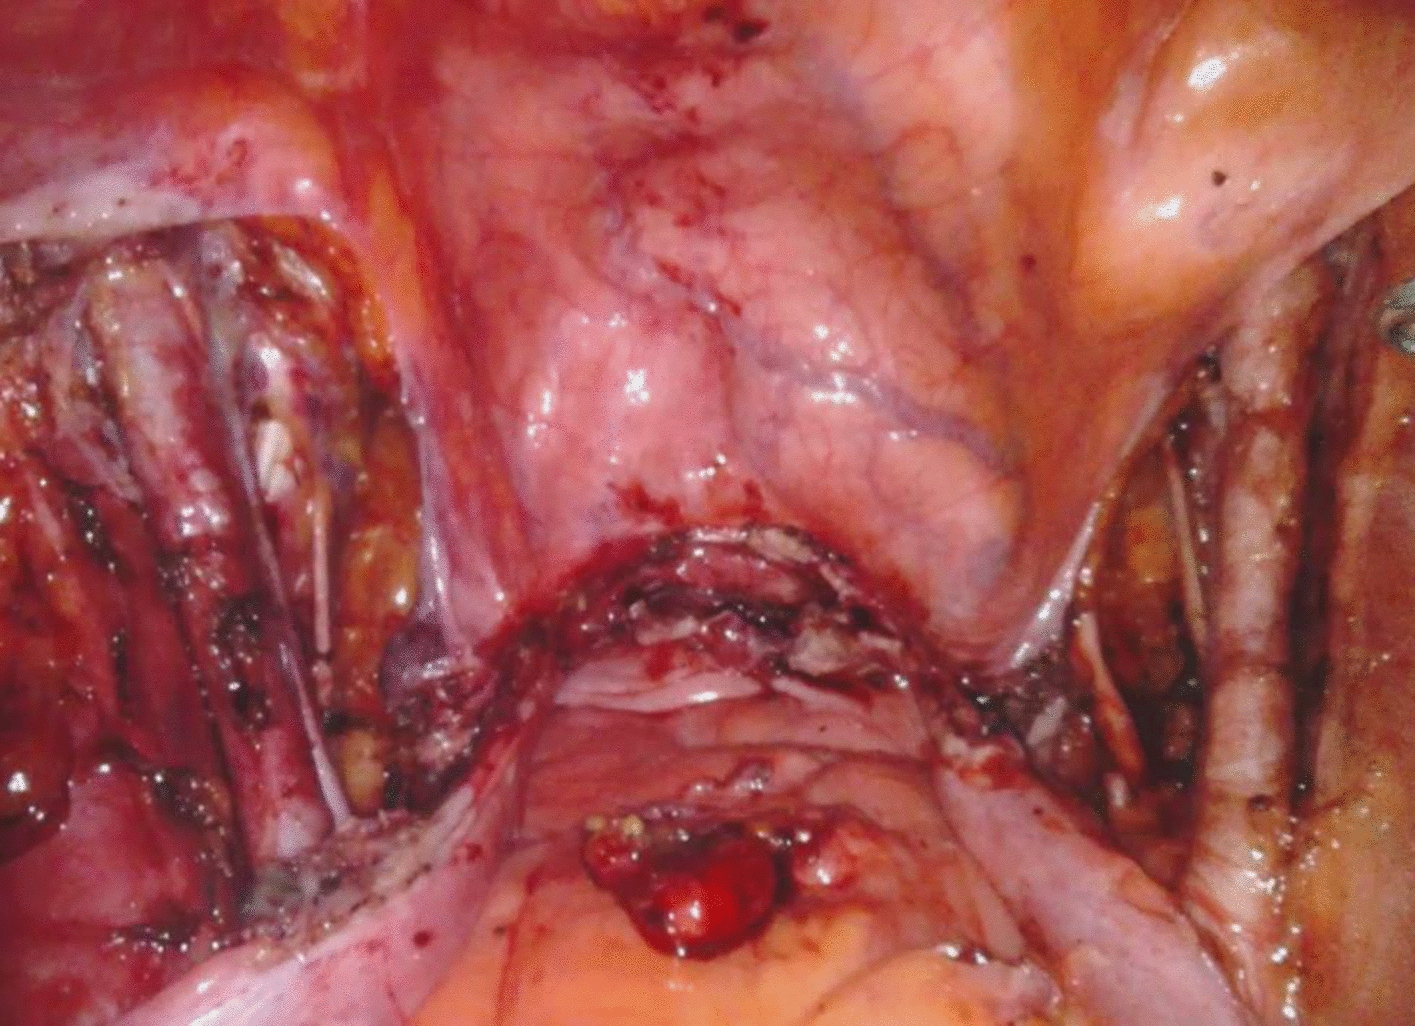 Lymphedema in Patients Undergoing Surgery for Endometrial Cancer: A Comparative Study of Sentinel Node Biopsy Versus Complete Pelvic Node Dissection